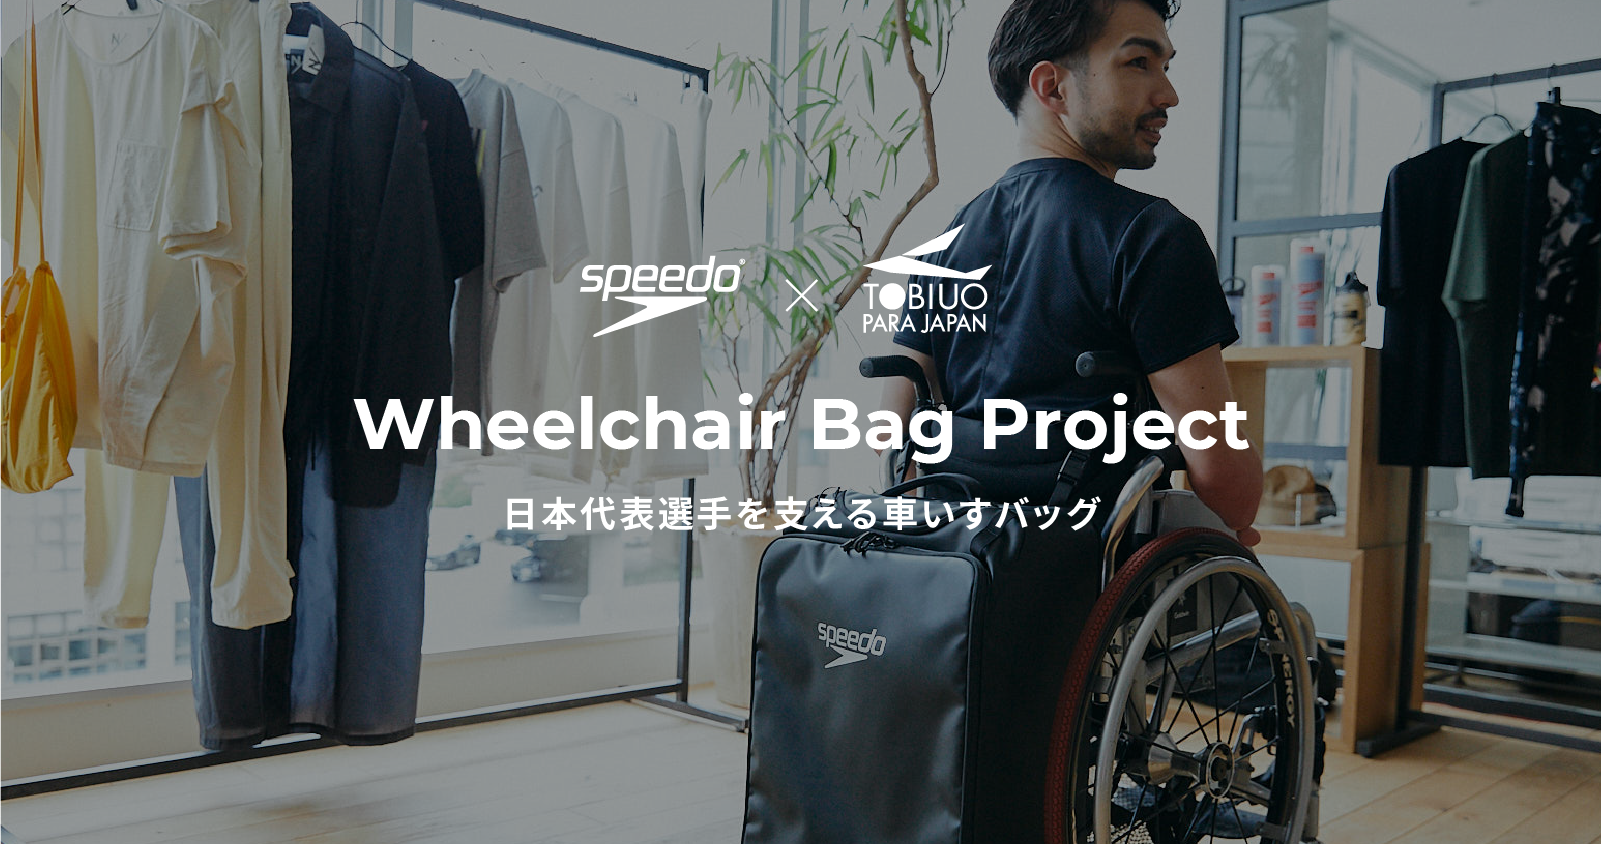 Wheelchair Bag Project 2020